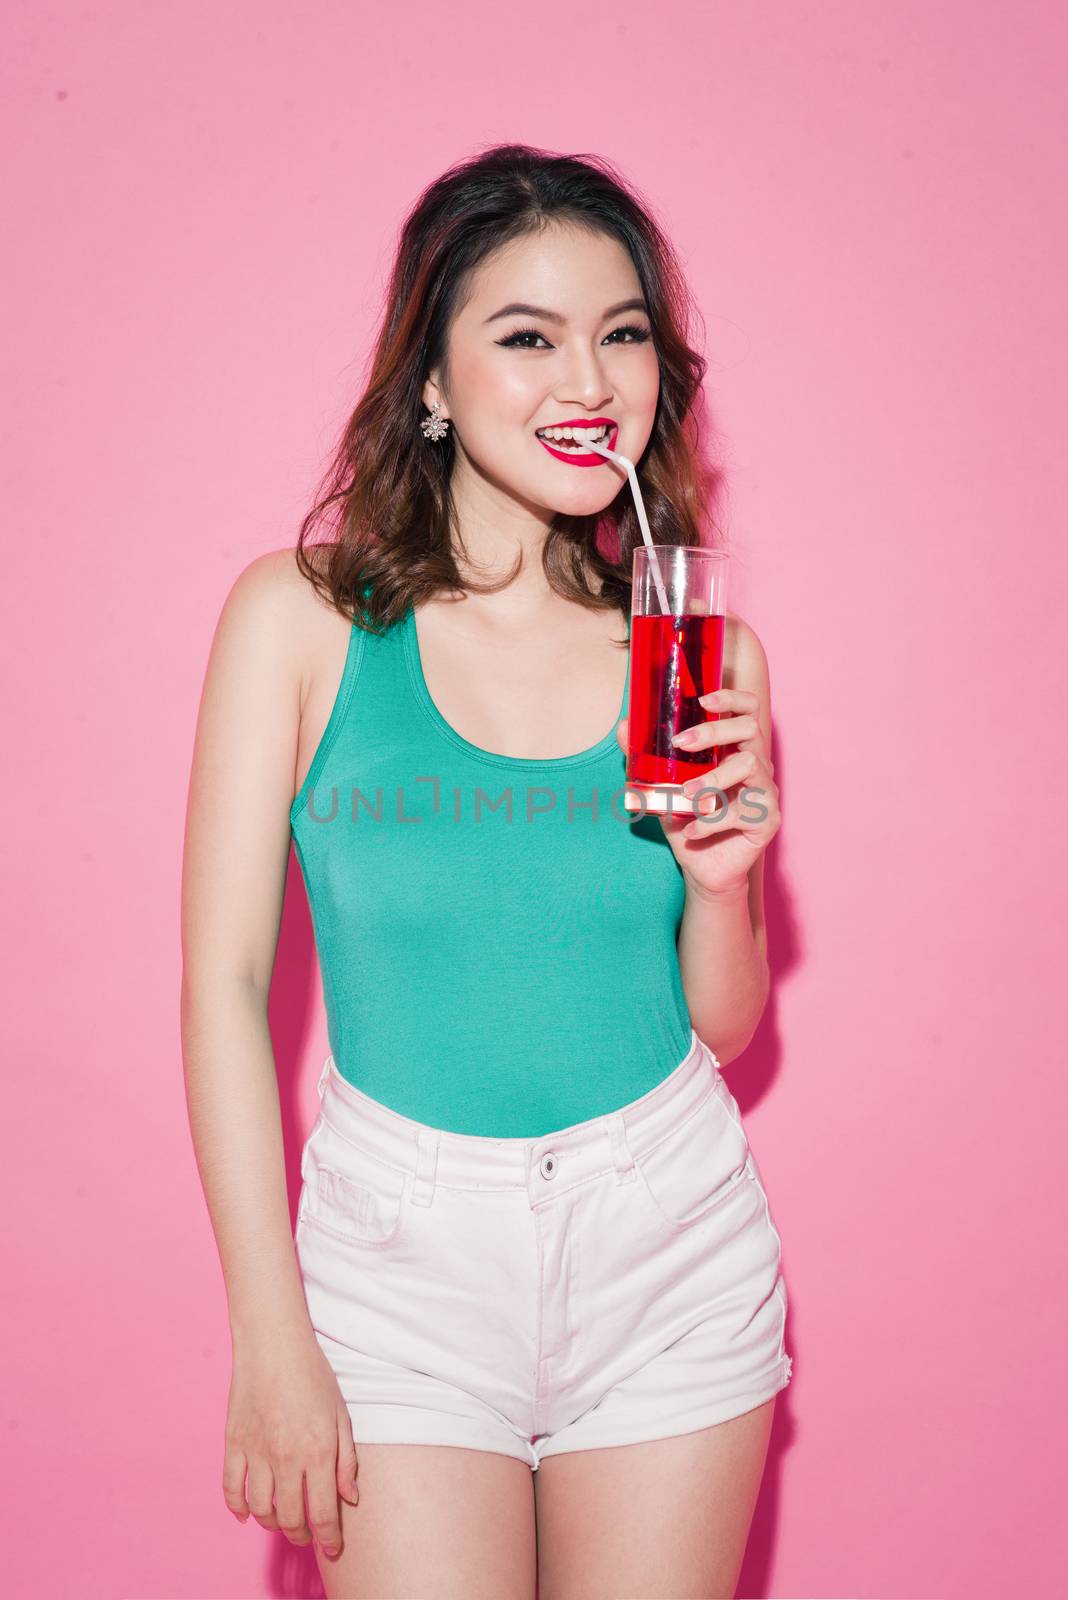 Celebrating asian girl with professional makeup and stylish hairstyle holding a glass of champagne.